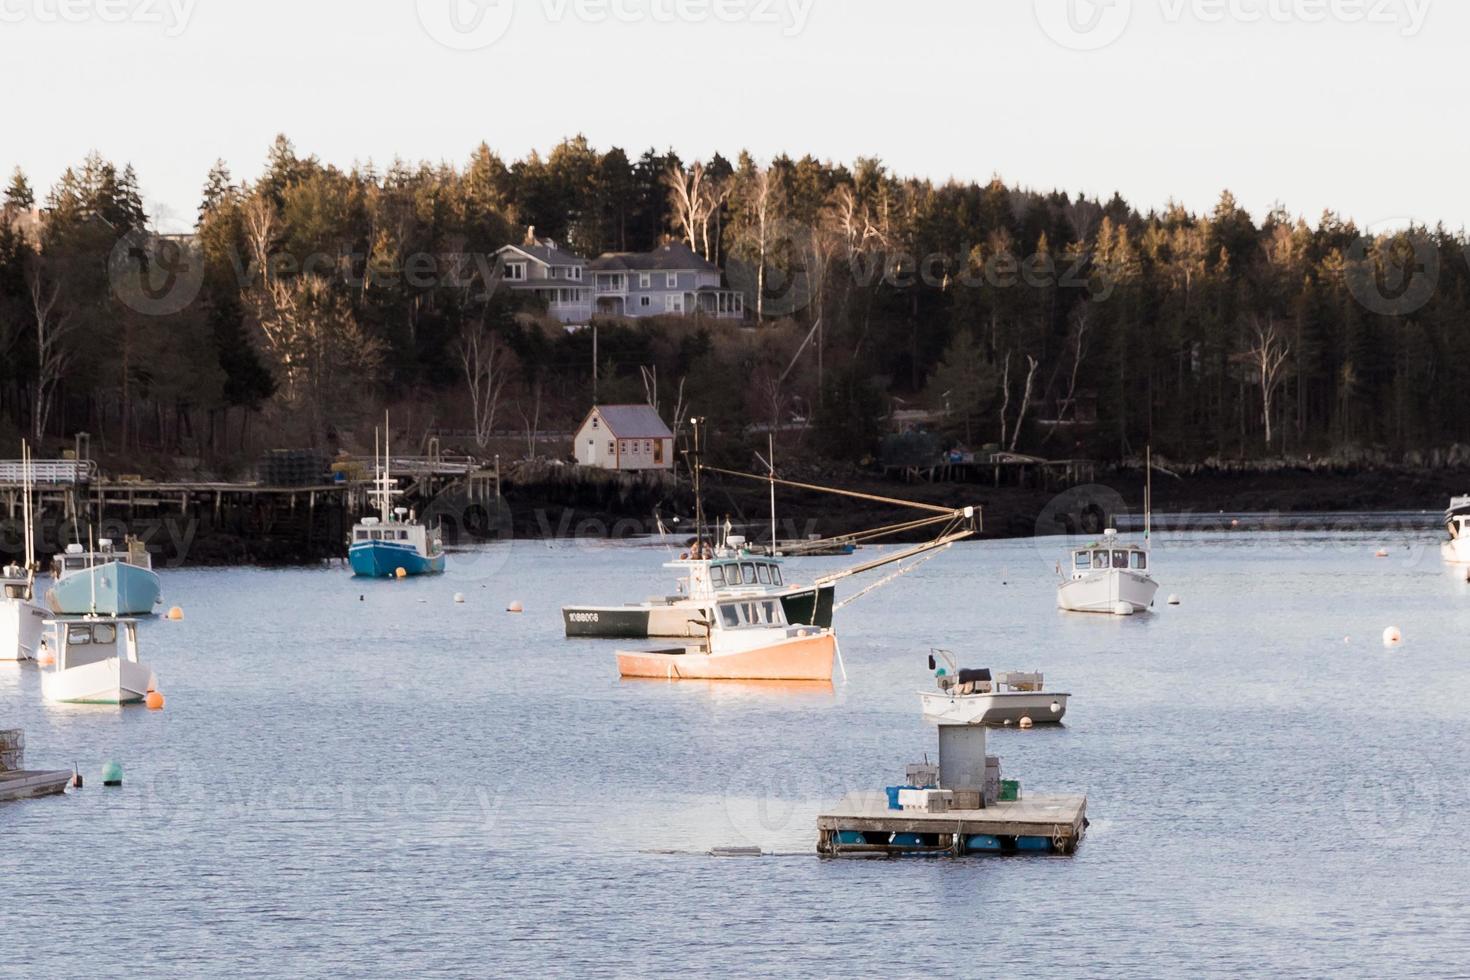 Boats in the water photo